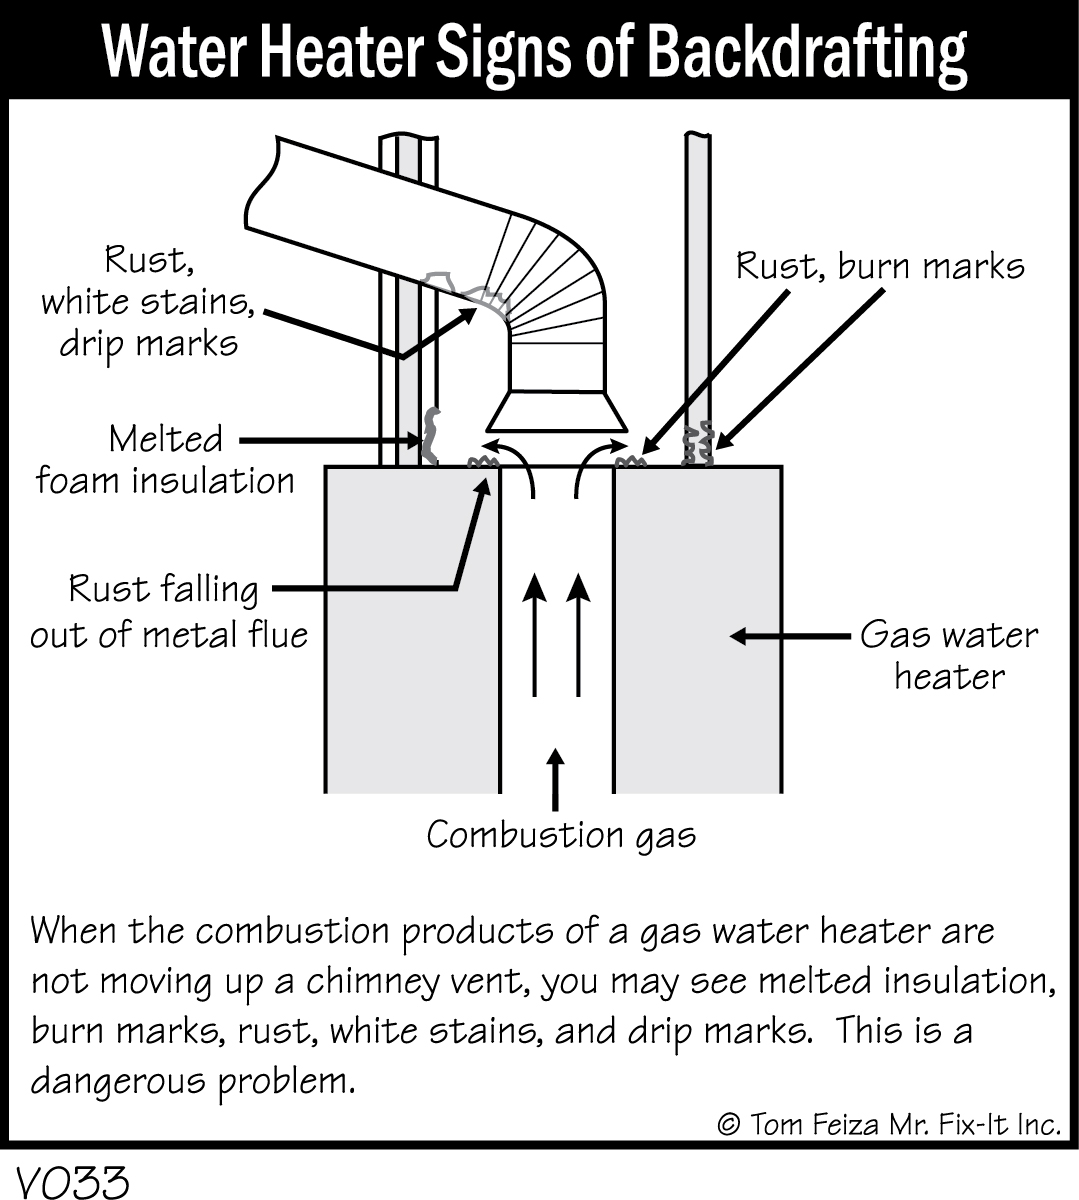 V033 - Water Heater Signs of Backdrafting